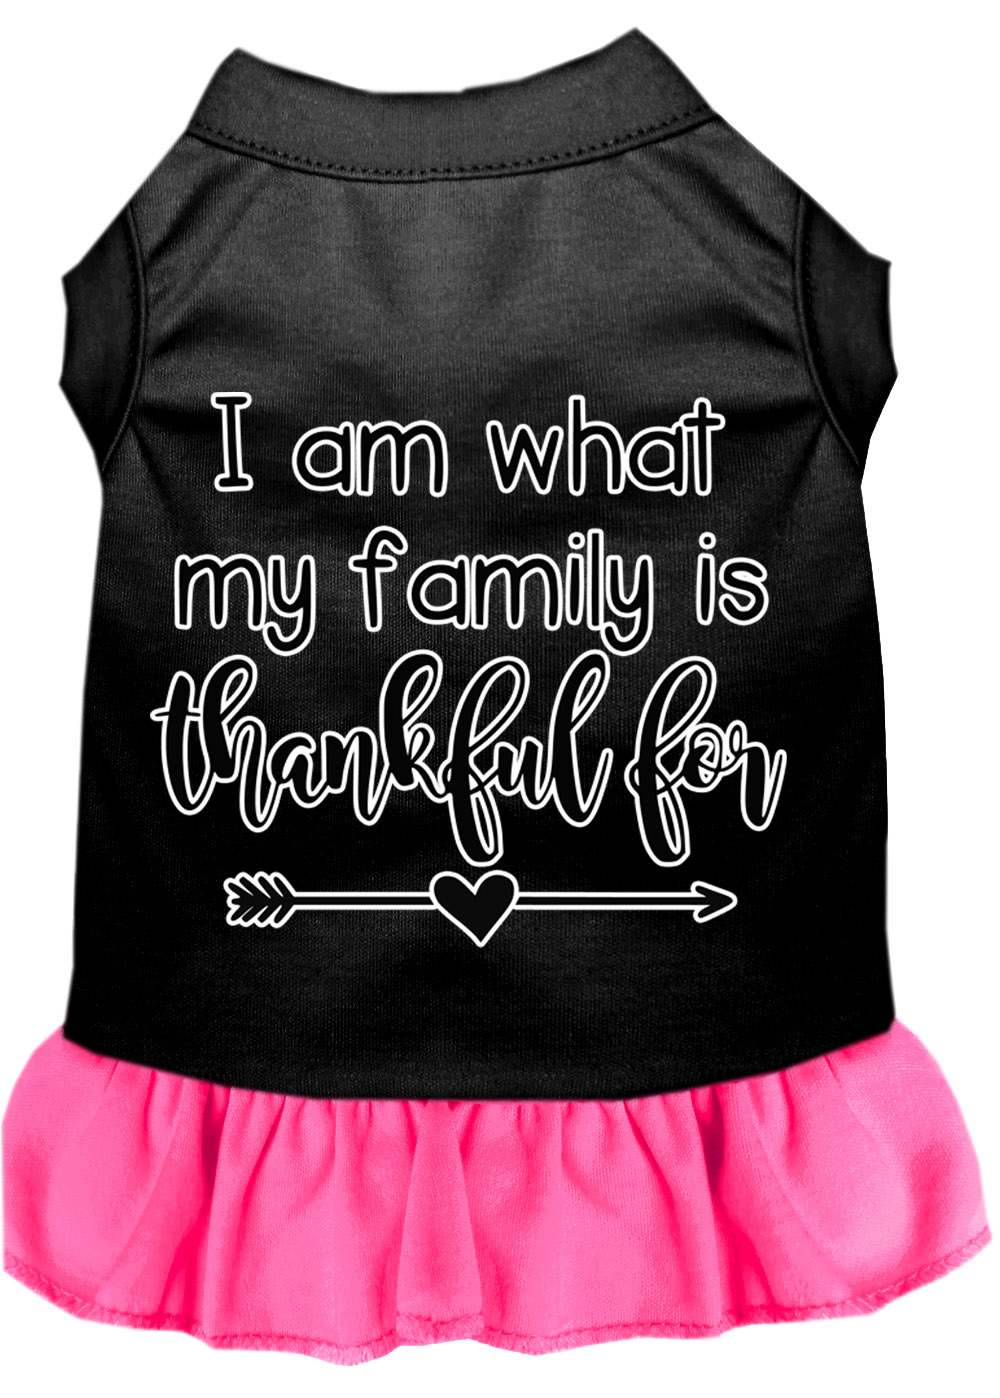 I Am What My Family is Thankful For Screen Print Dog Dress Black with Bright Pink Lg